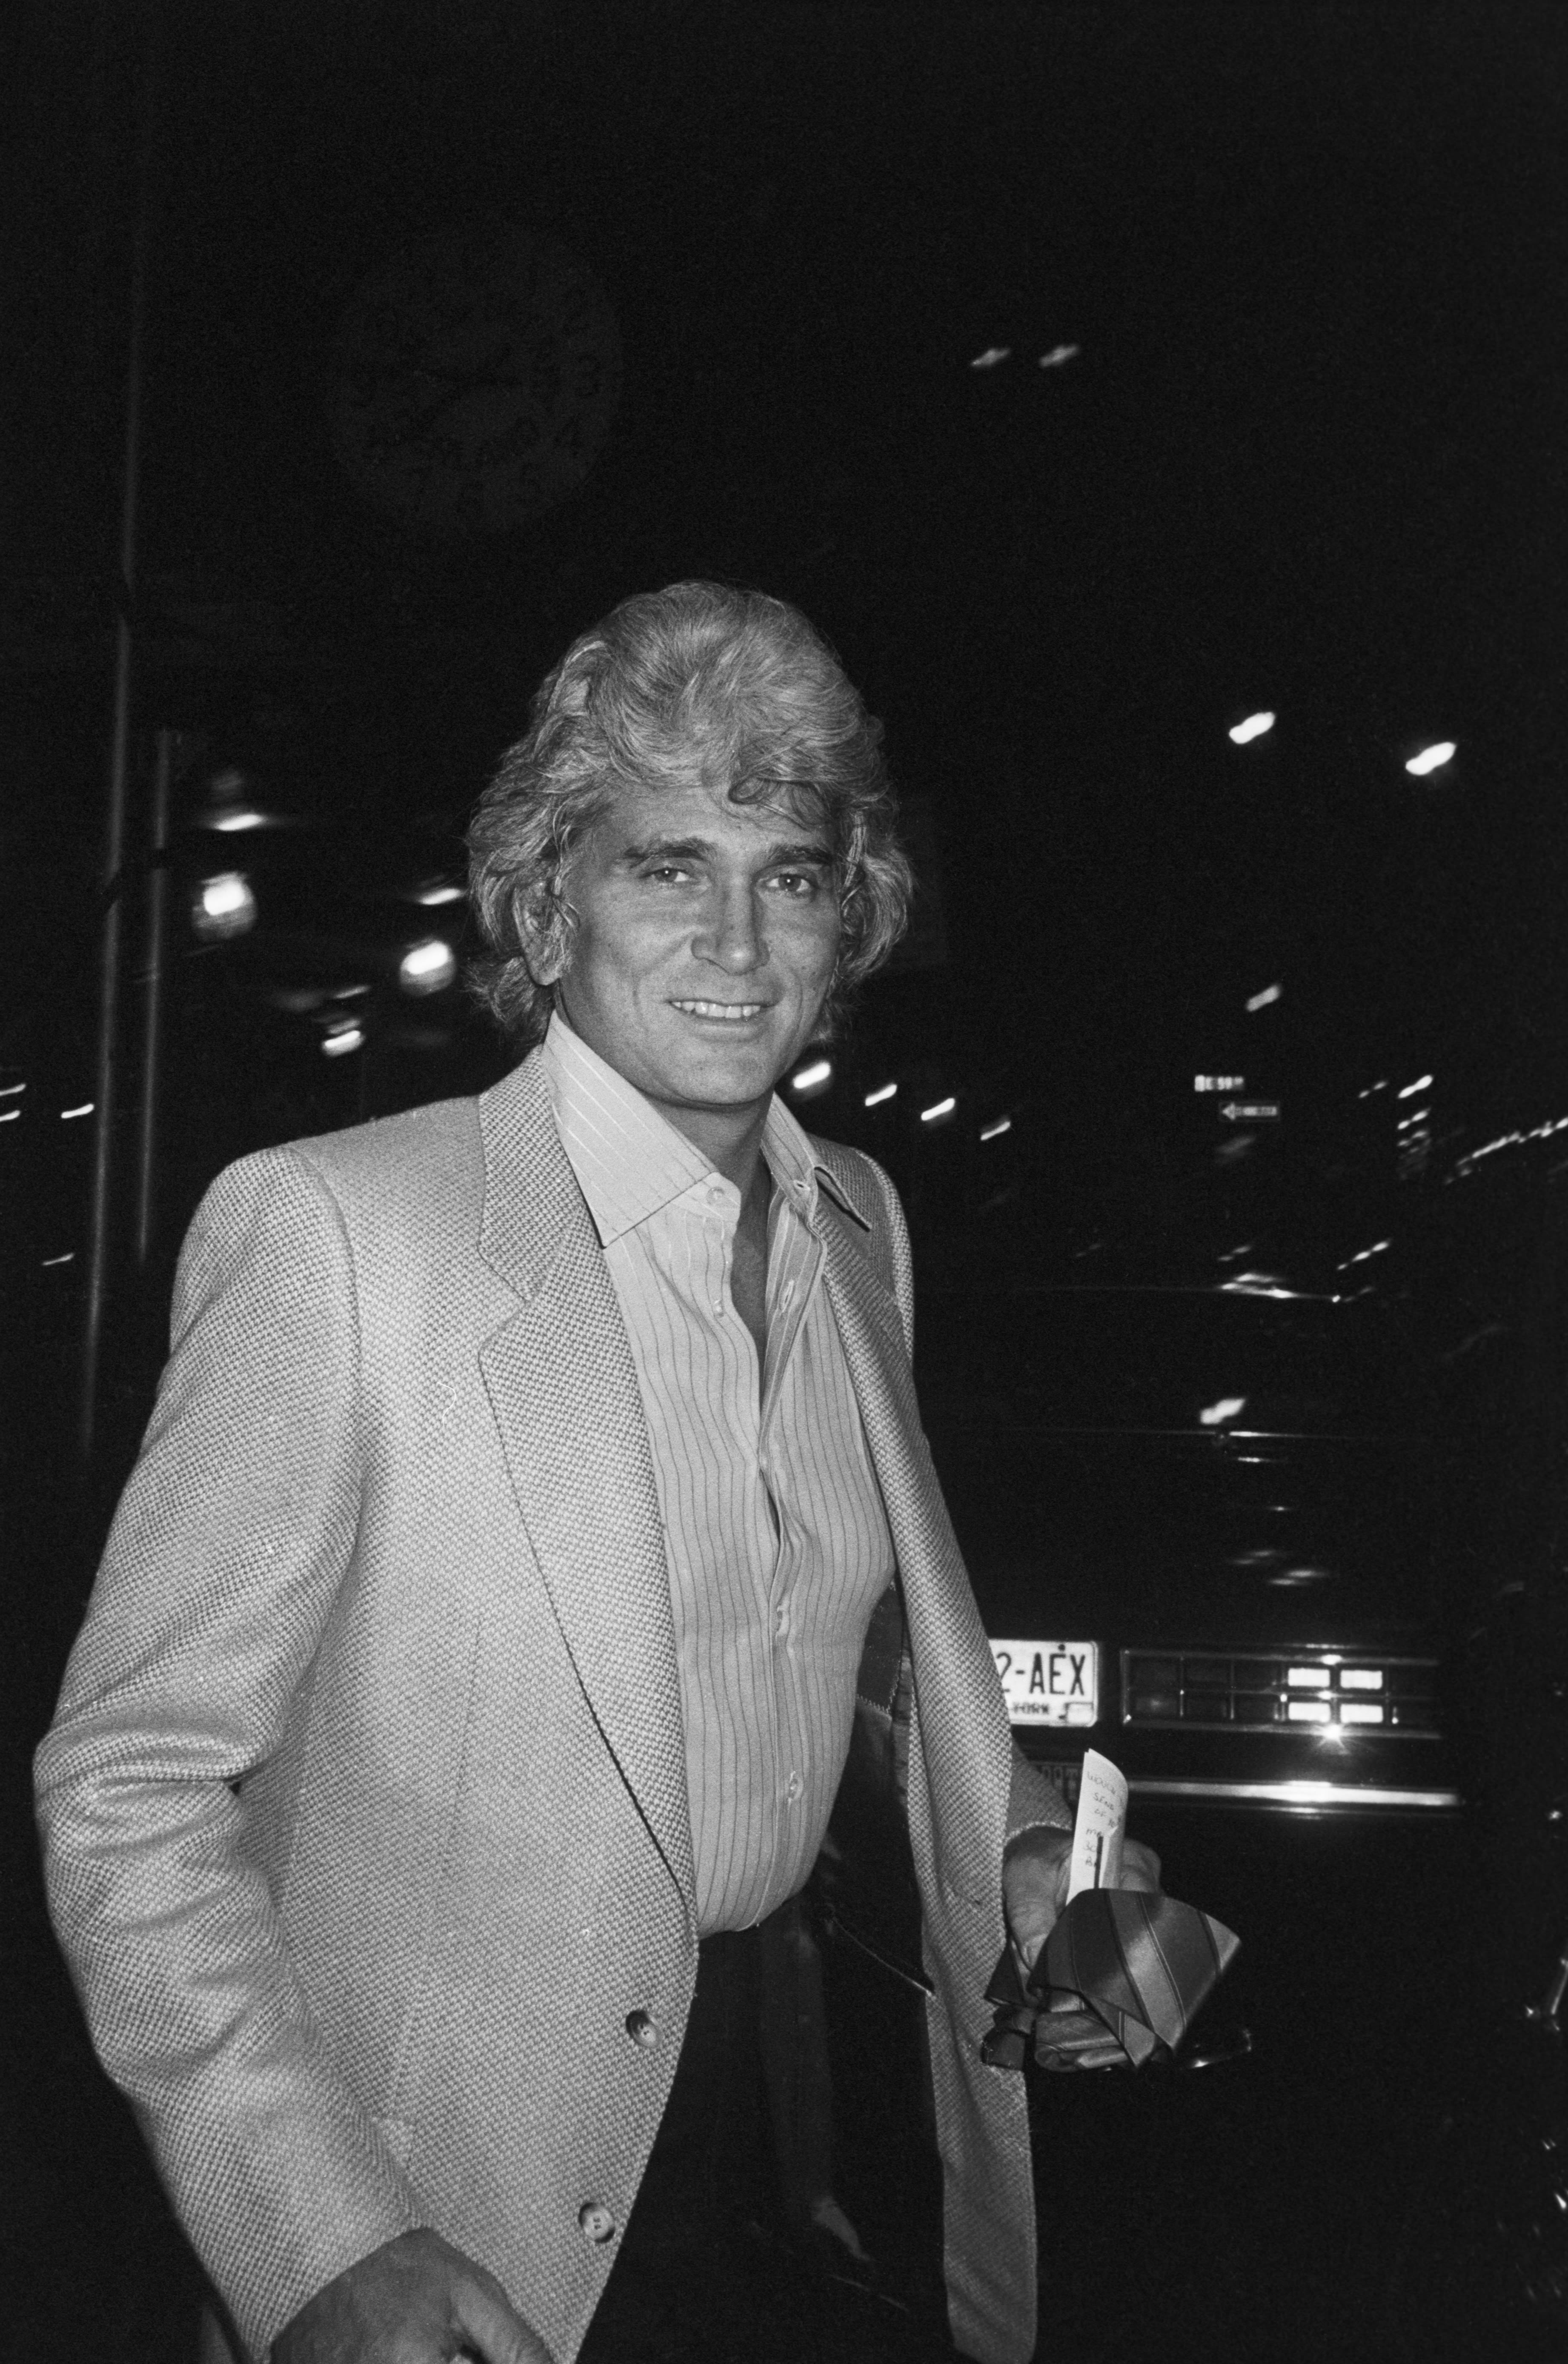 Michael Landon’s Children Still Feel His Spirit After His Death: ‘He Remained So Positive’